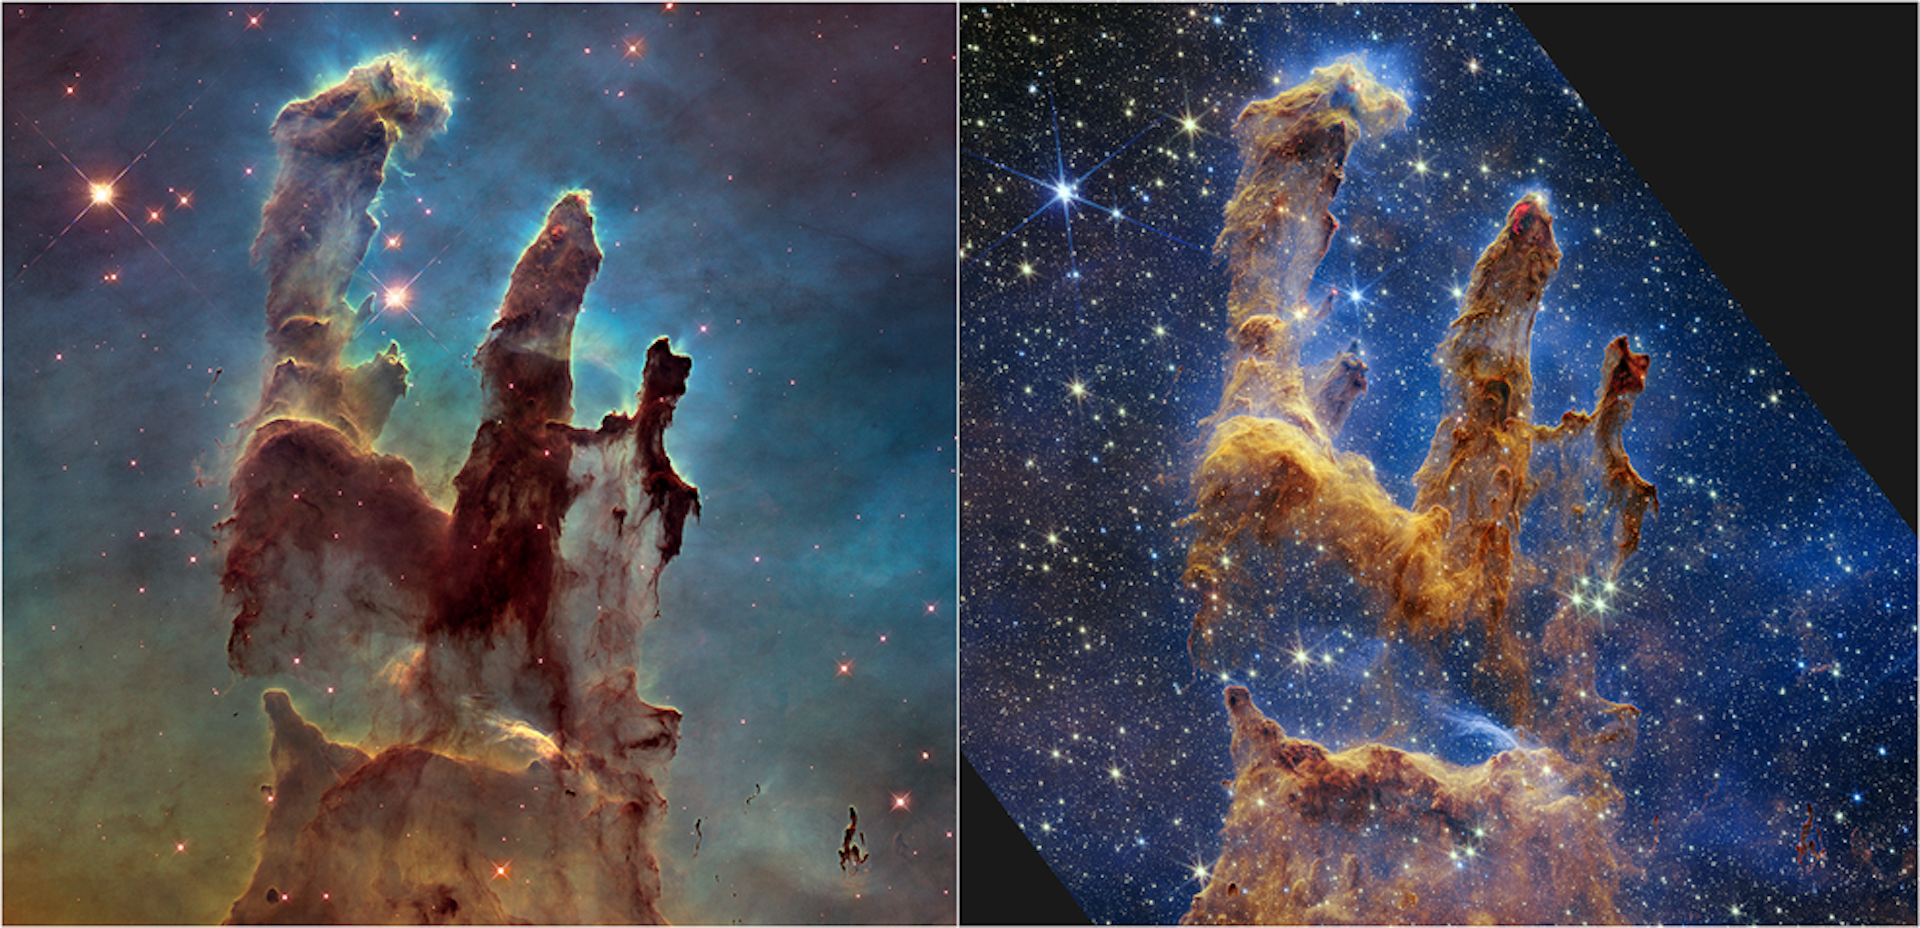 Two side-by-side images of finger-like protrusions on a multicoloured starry background, wth more detail visible on the right